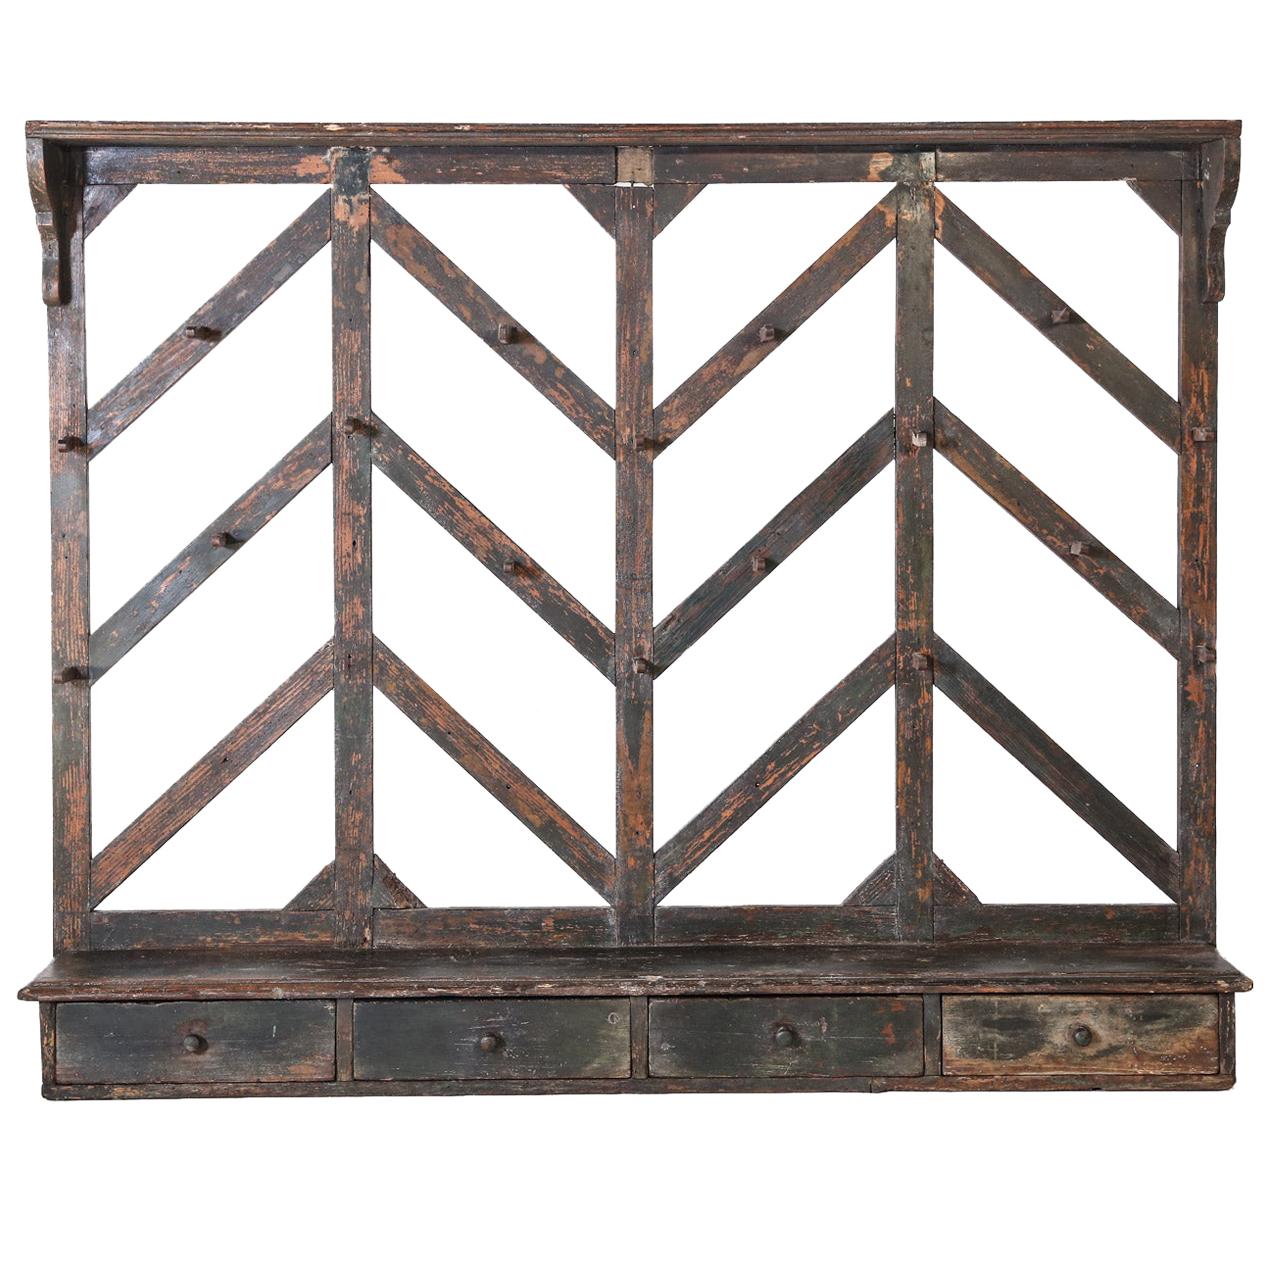 Antique French Kitchen Hanging Rack